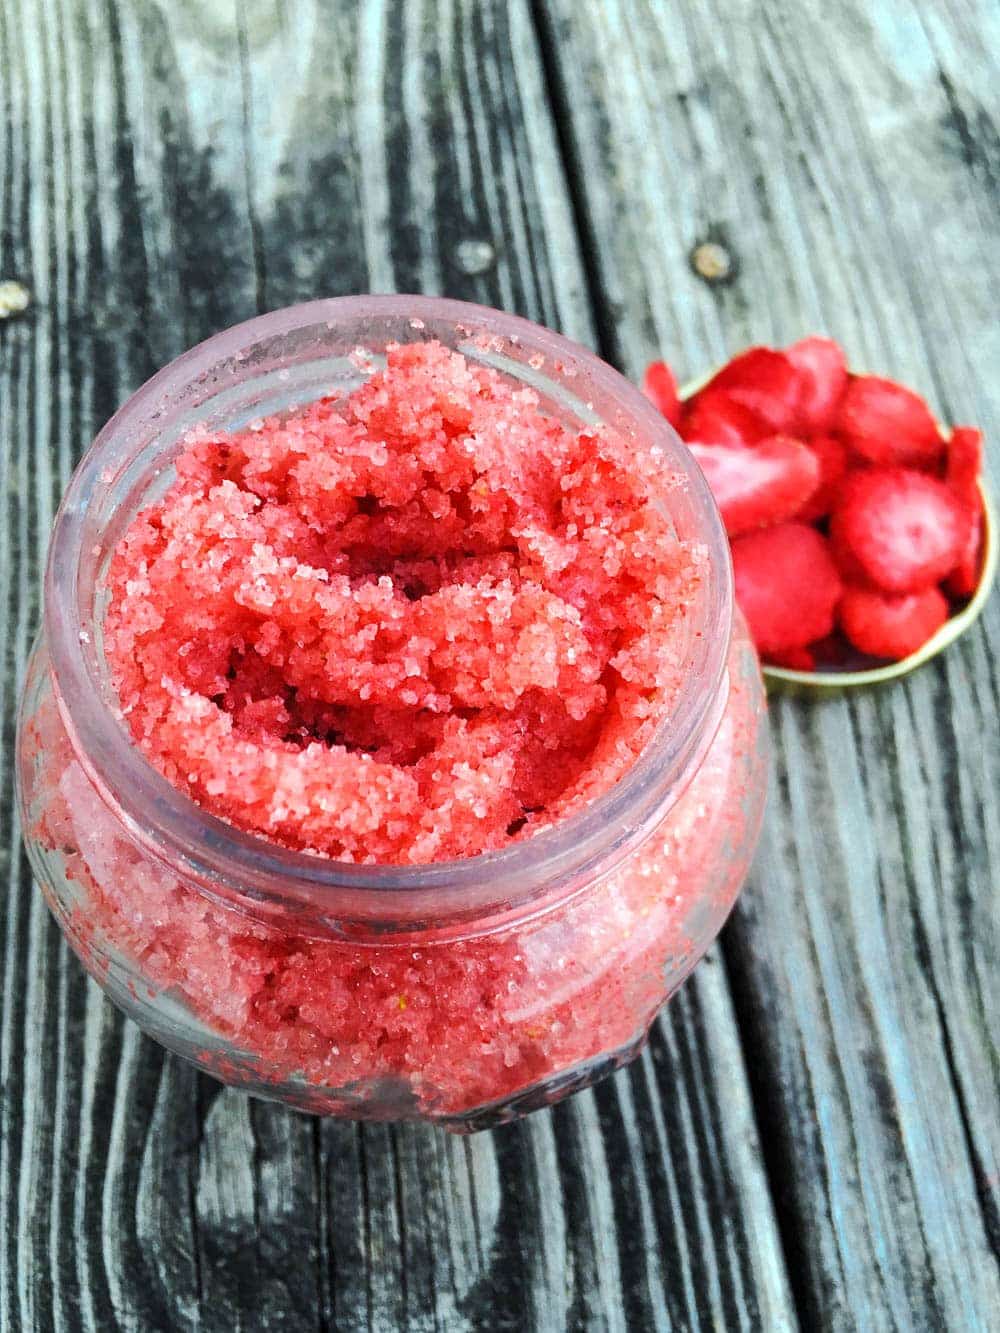 a close up picture of the sugar scrub in a car with a blurred background of strawberries and distressed wood